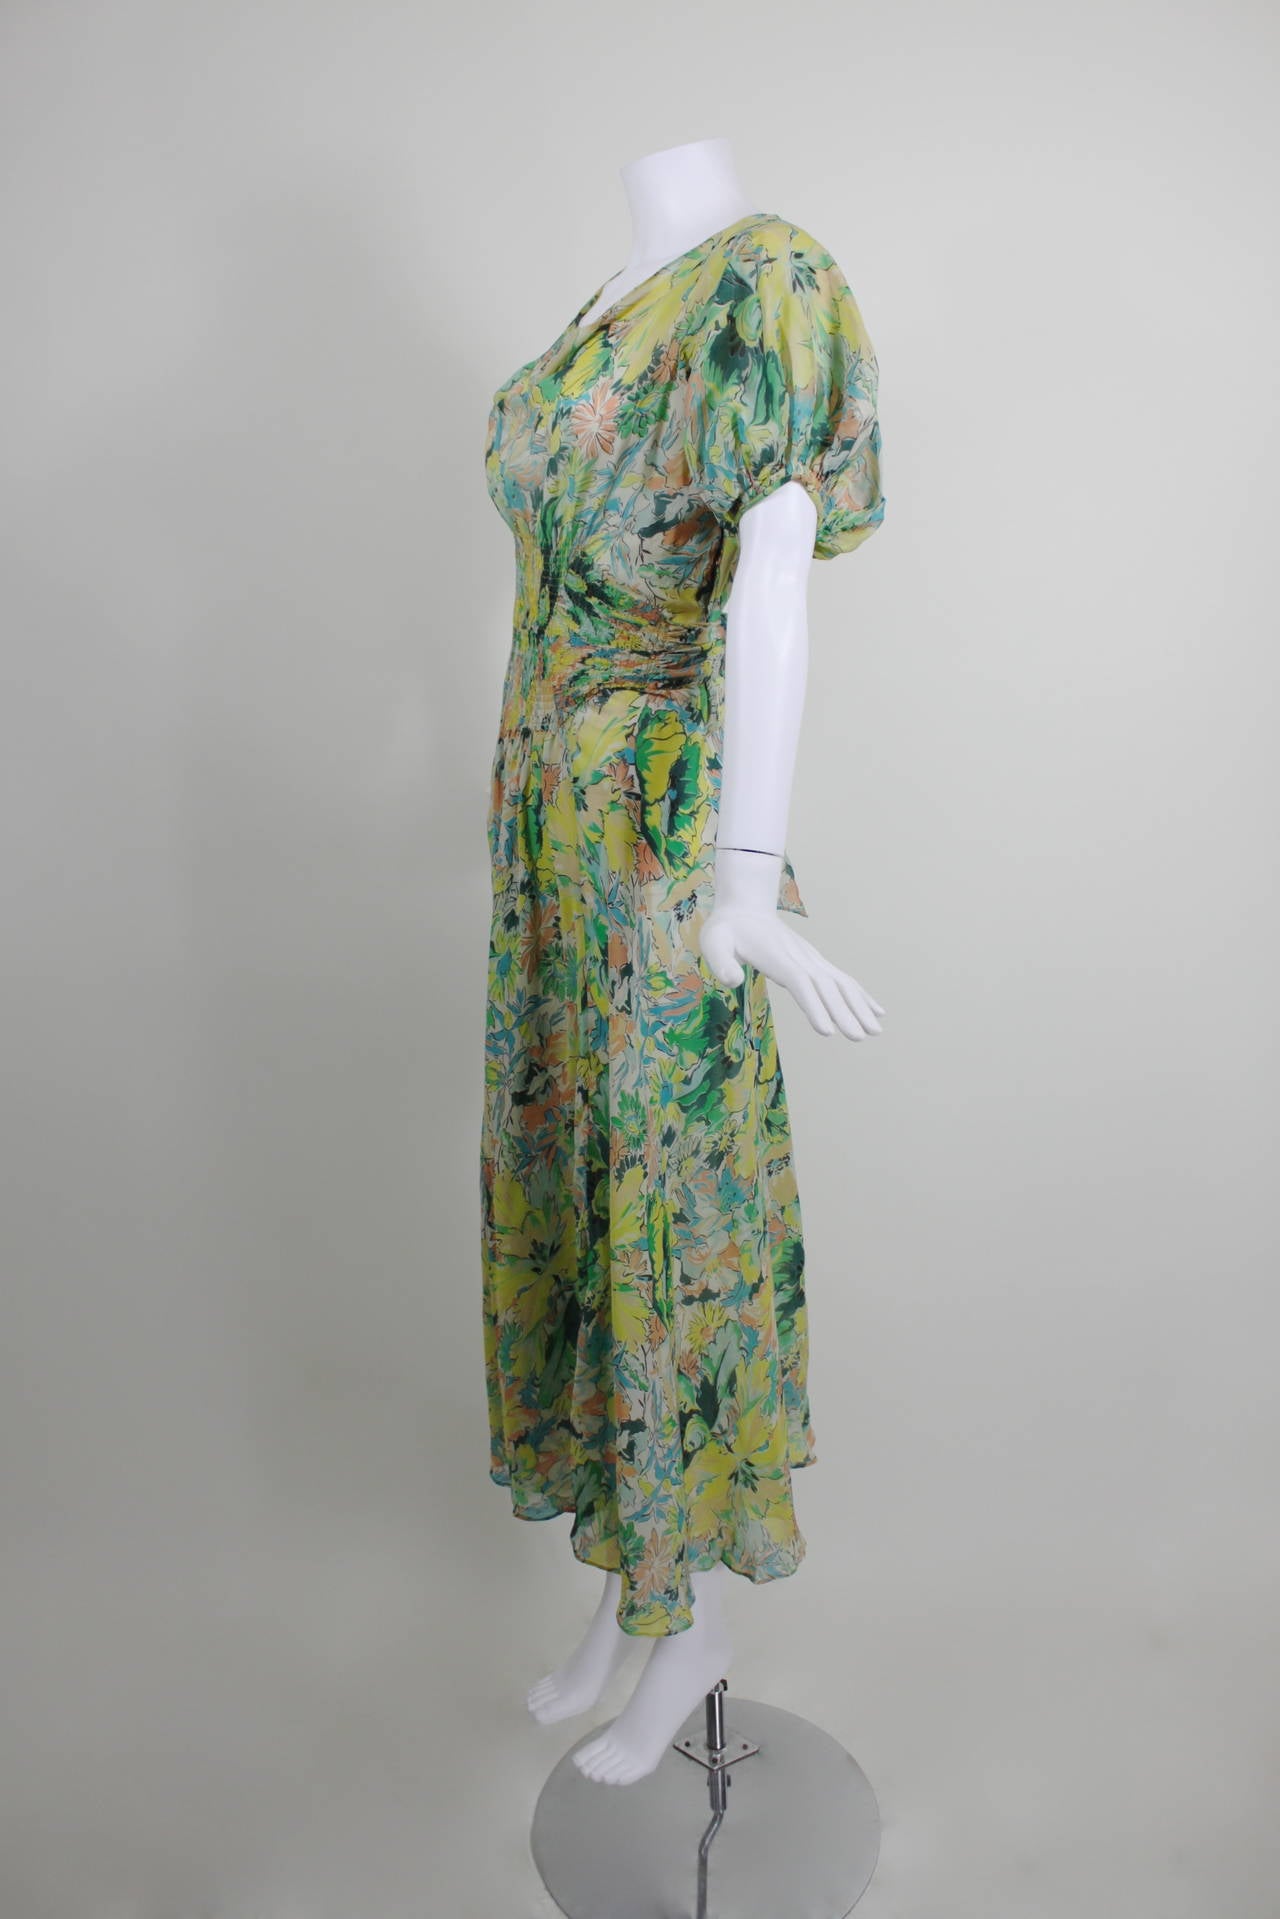 This dress is a gorgeous example of 1930s floral chiffon. Featuring a vibrant, colorful, painterly floral print, the dress has princess sleeves, a blouson bodice, and beautiful smocking at the waist. The tea-length skirt is lovely and